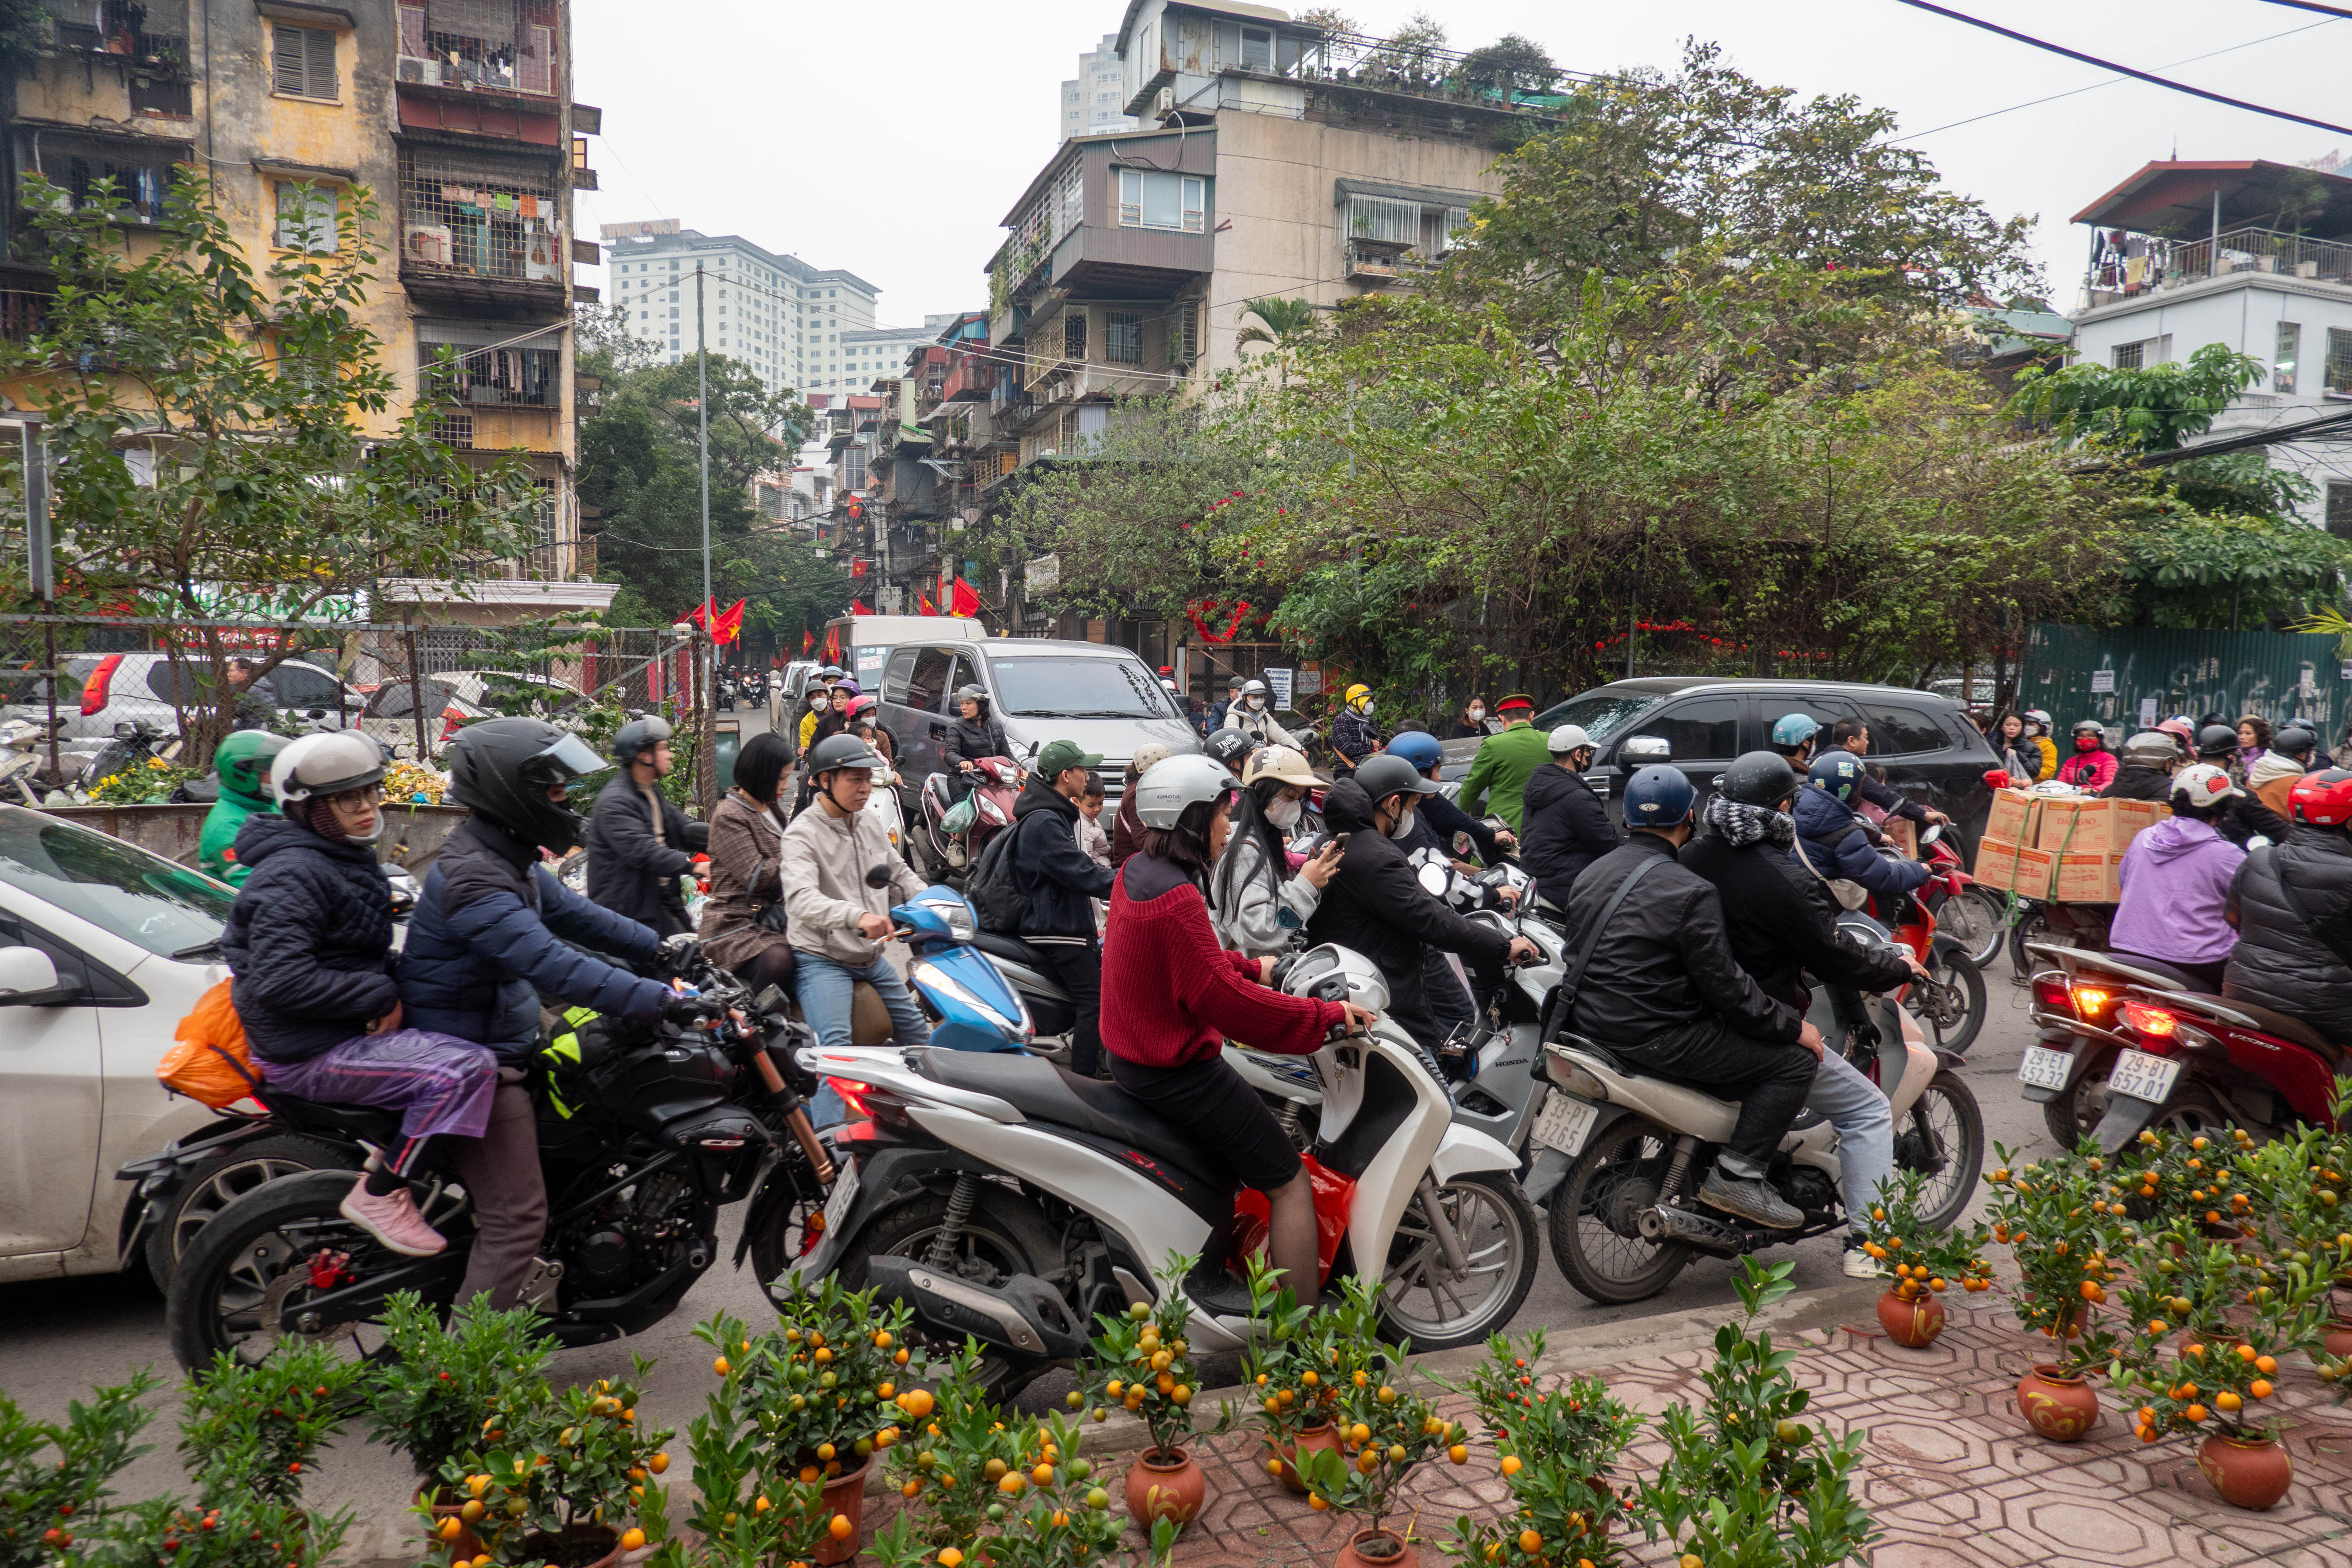 picture of congested traffic at an intersection of two roads. Motorcyles and cars fight for the same space.